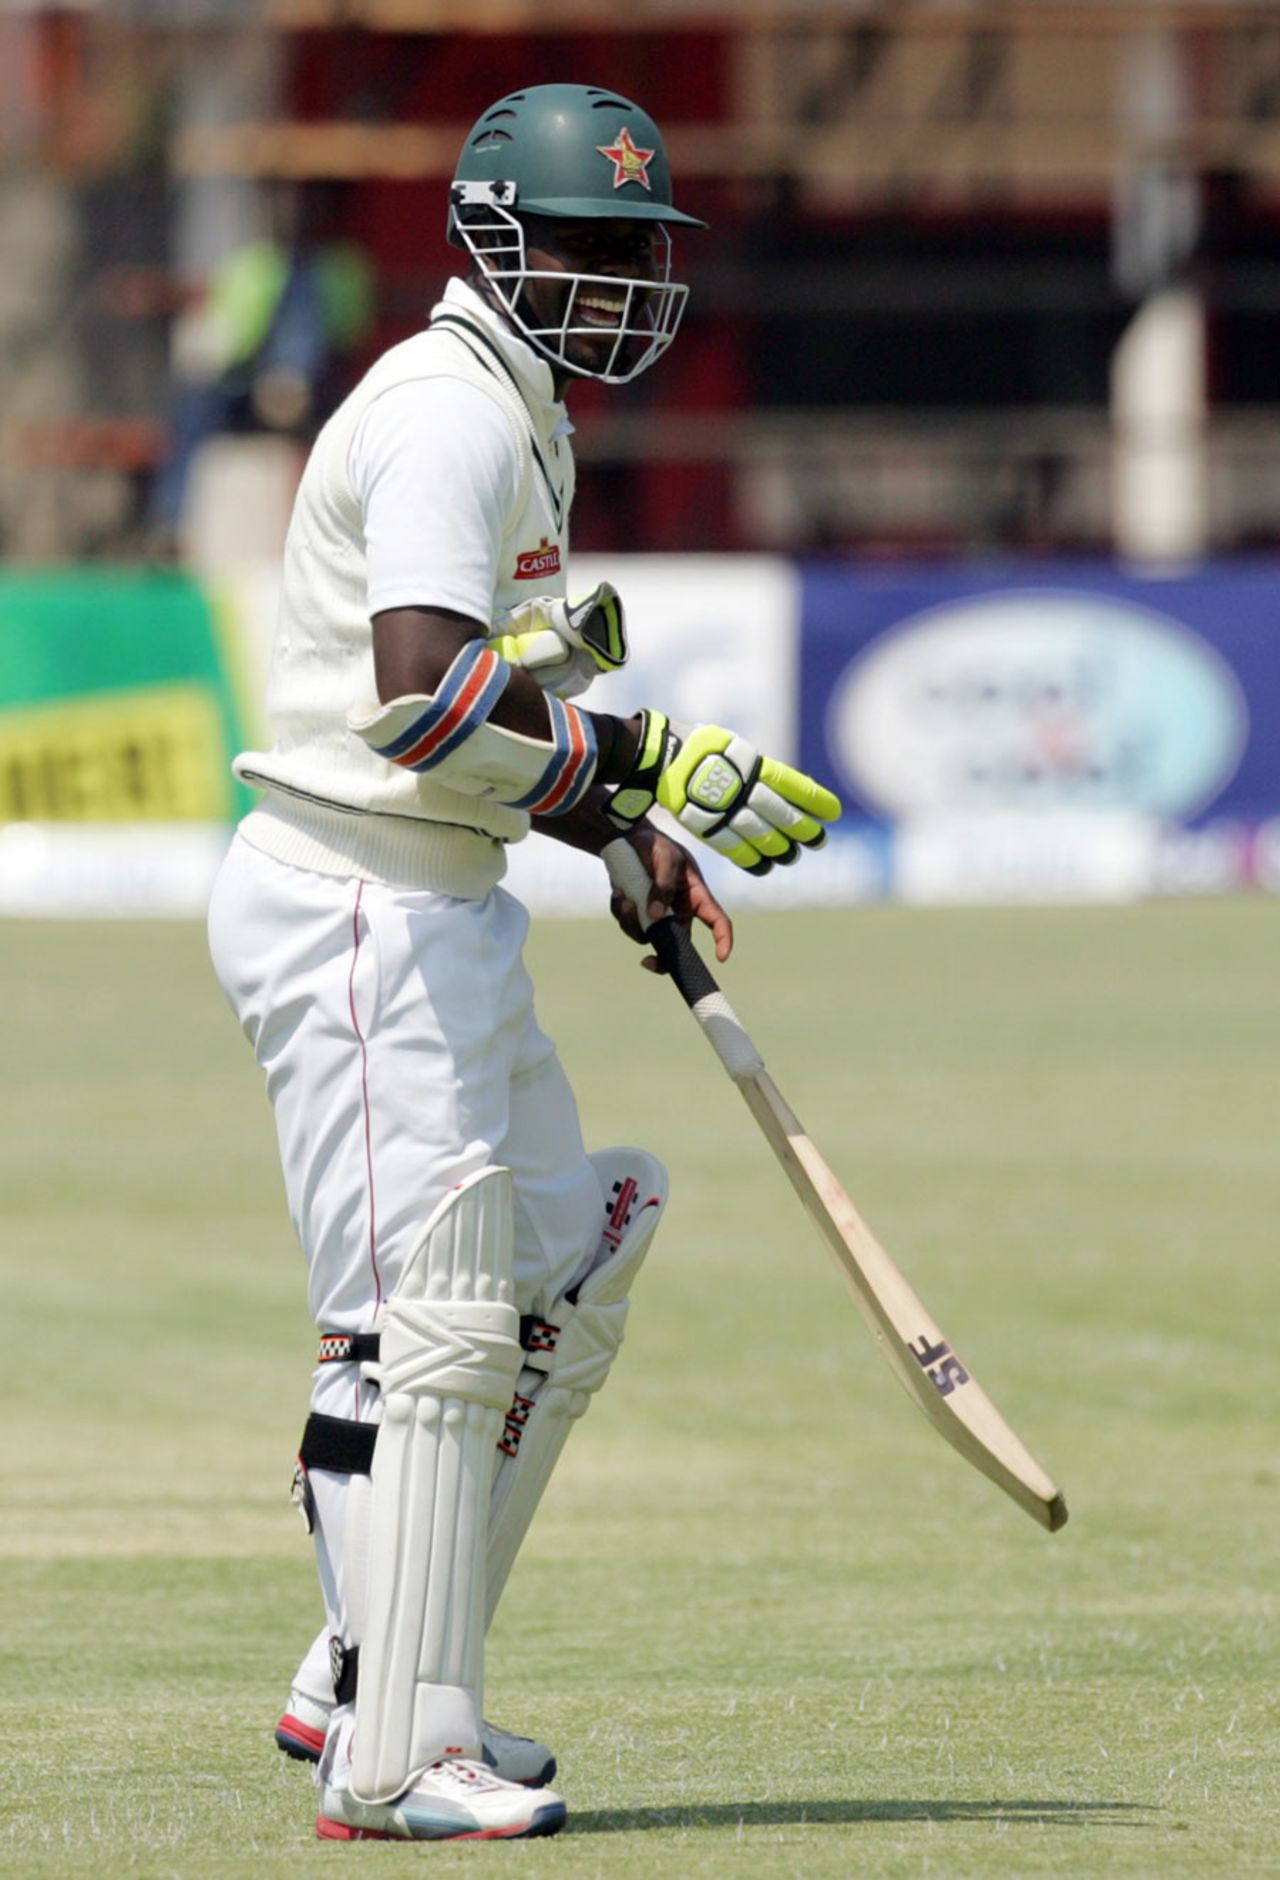 Brian Vitori was part of a final-wicket stand of 46 runs with Tendai Chatara, Zimbabwe v Pakistan, 2nd Test, Harare, 2nd day, September 11, 2013